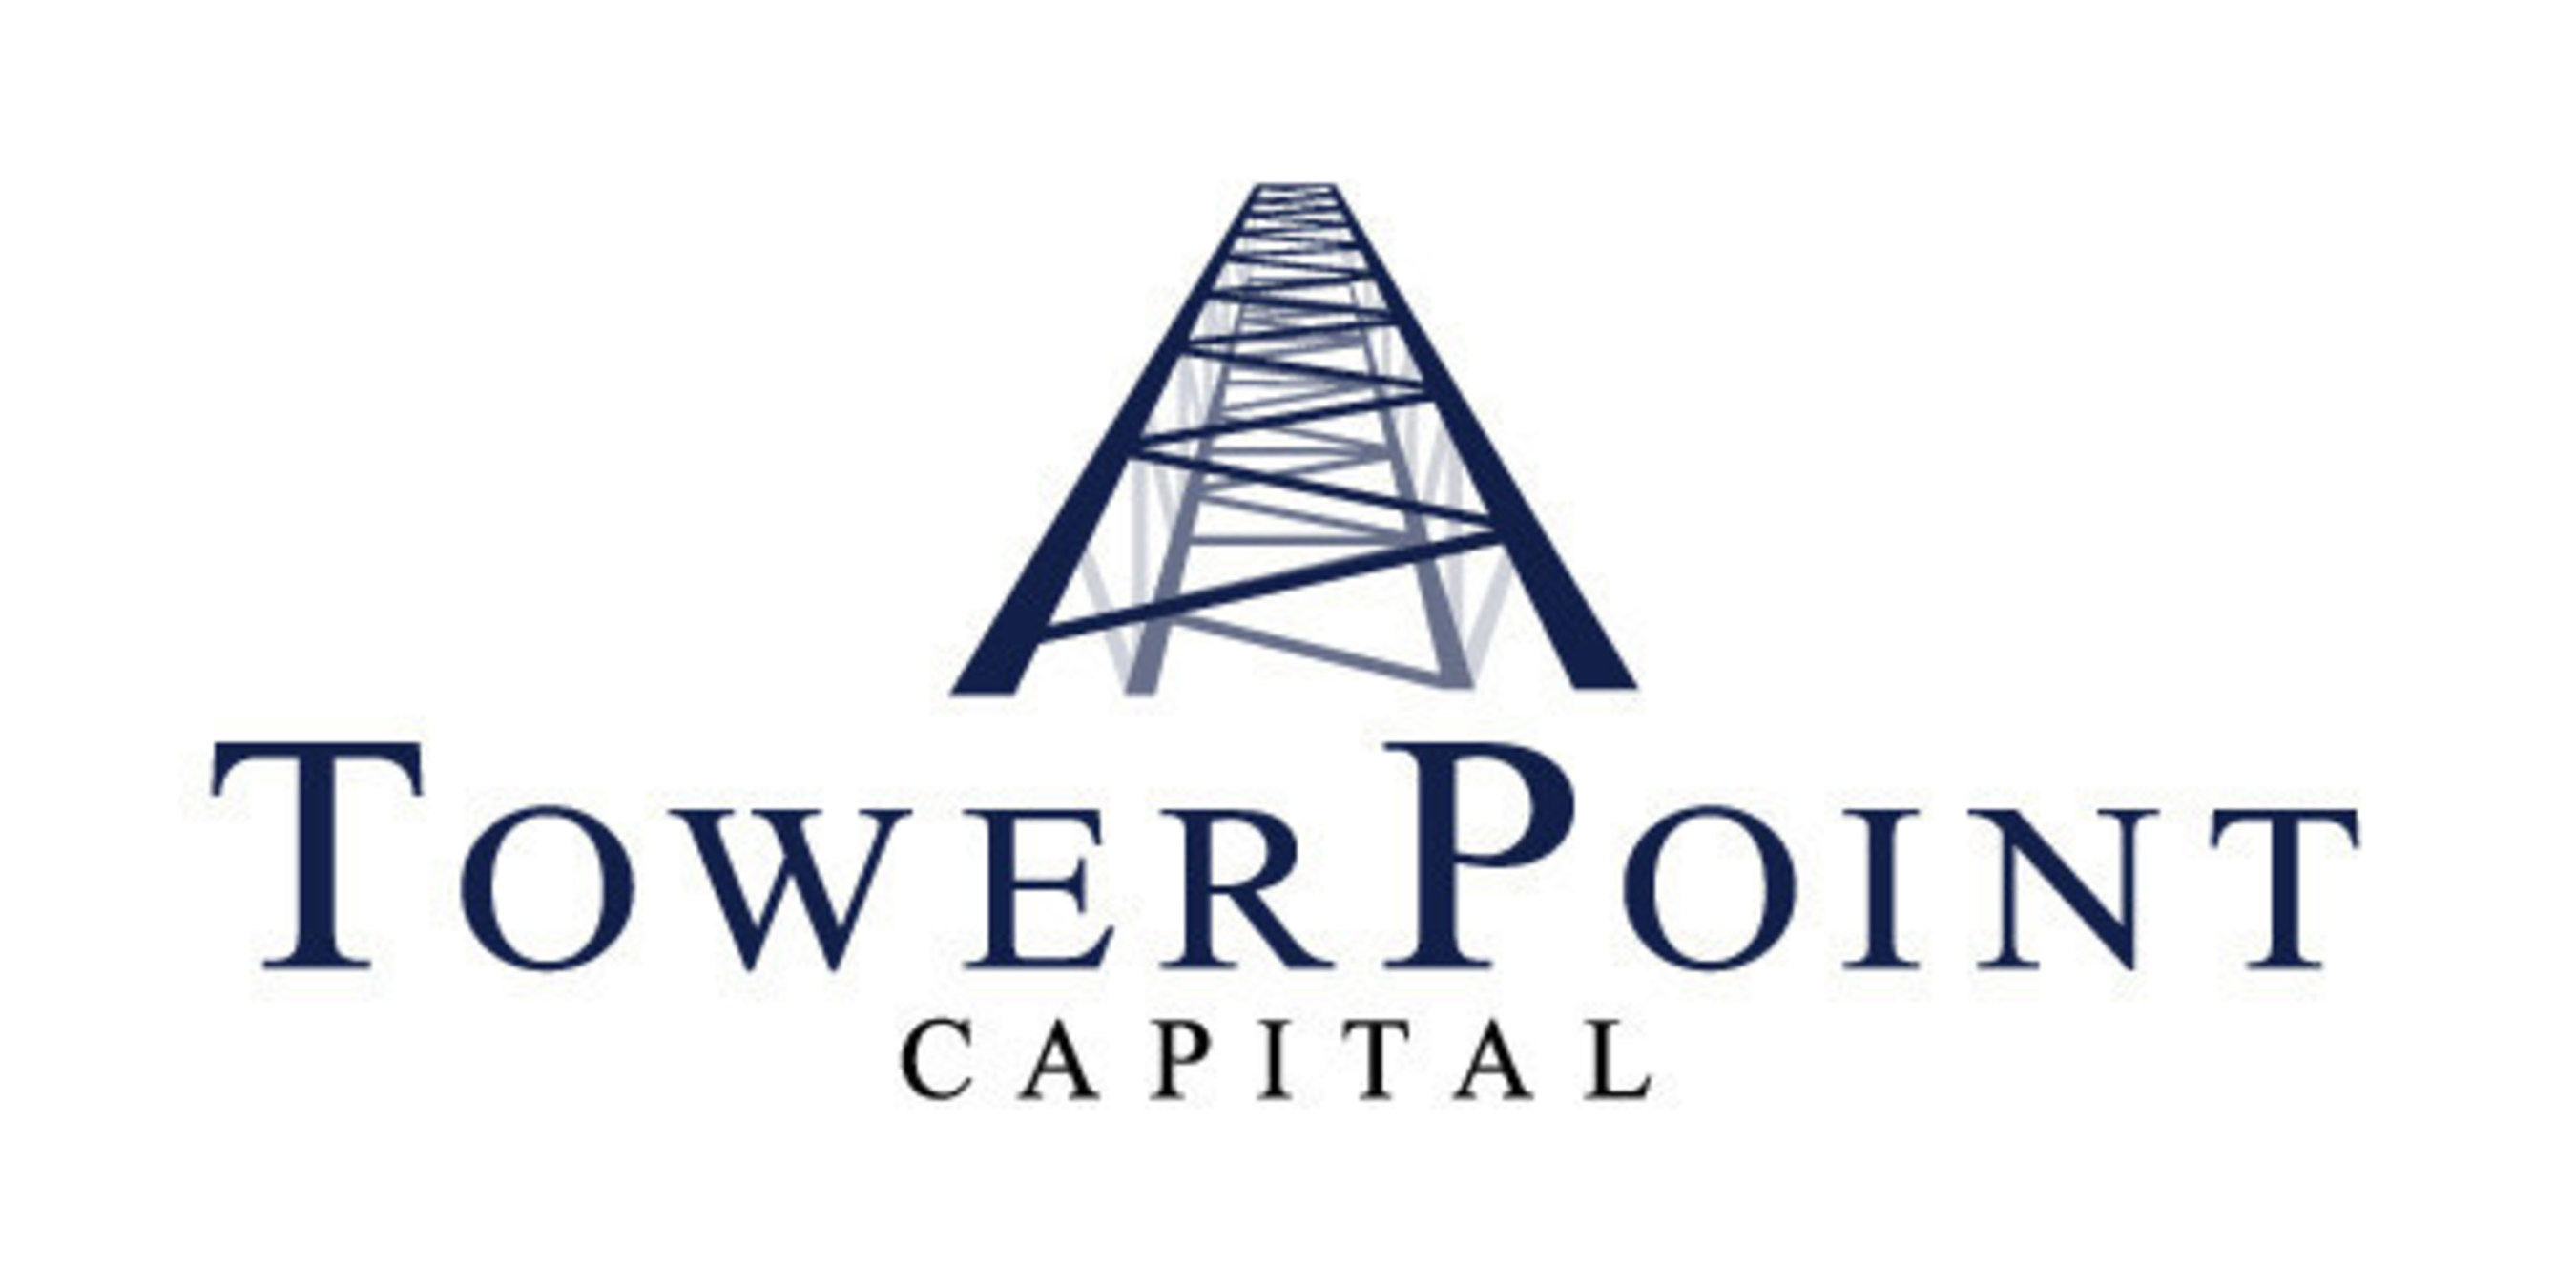 TowerPoint Capital Names Jesse Wellner as CEO. (PRNewsFoto/TowerPoint Capital)